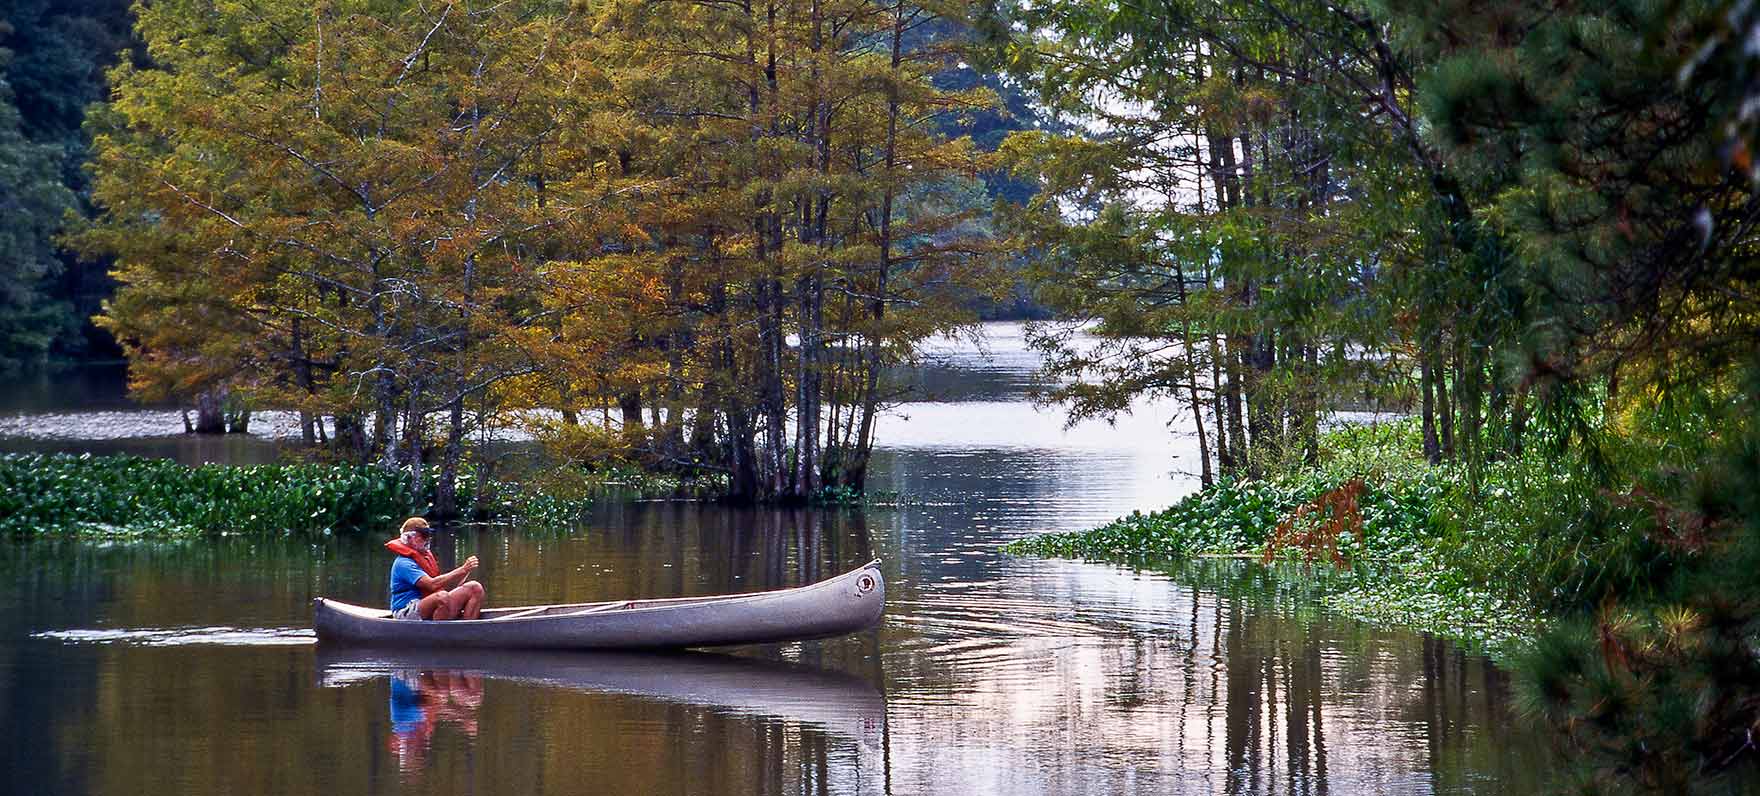 Canoe ride on the quiet waters at Martin Dies, Jr. State Park and Steinhagen Reservoir in East Texas